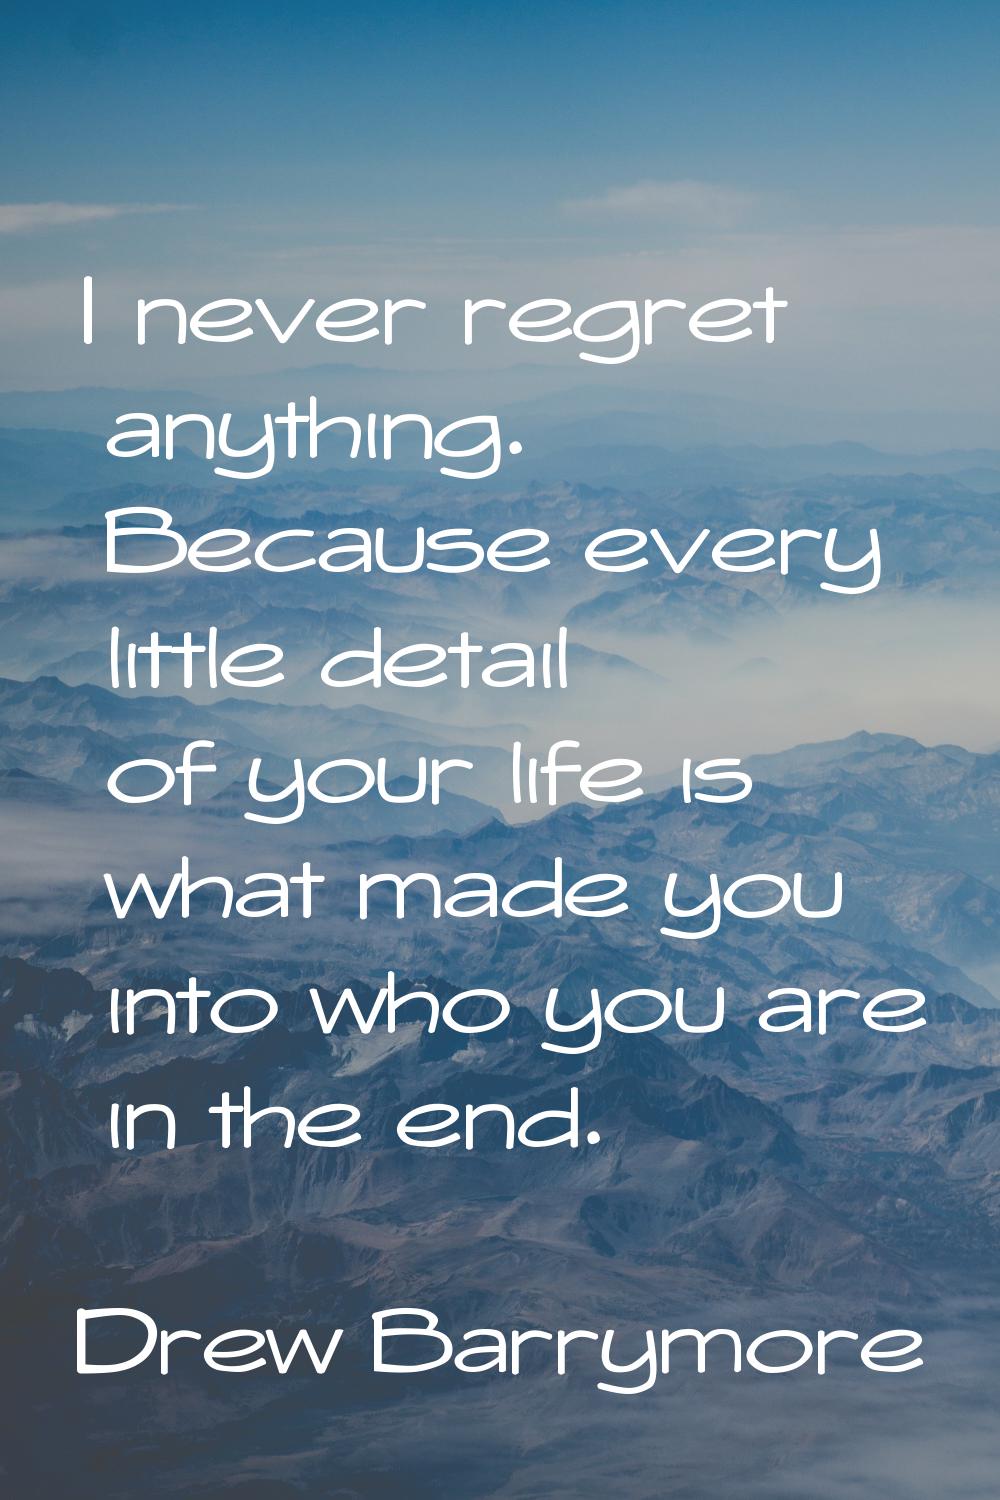 I never regret anything. Because every little detail of your life is what made you into who you are